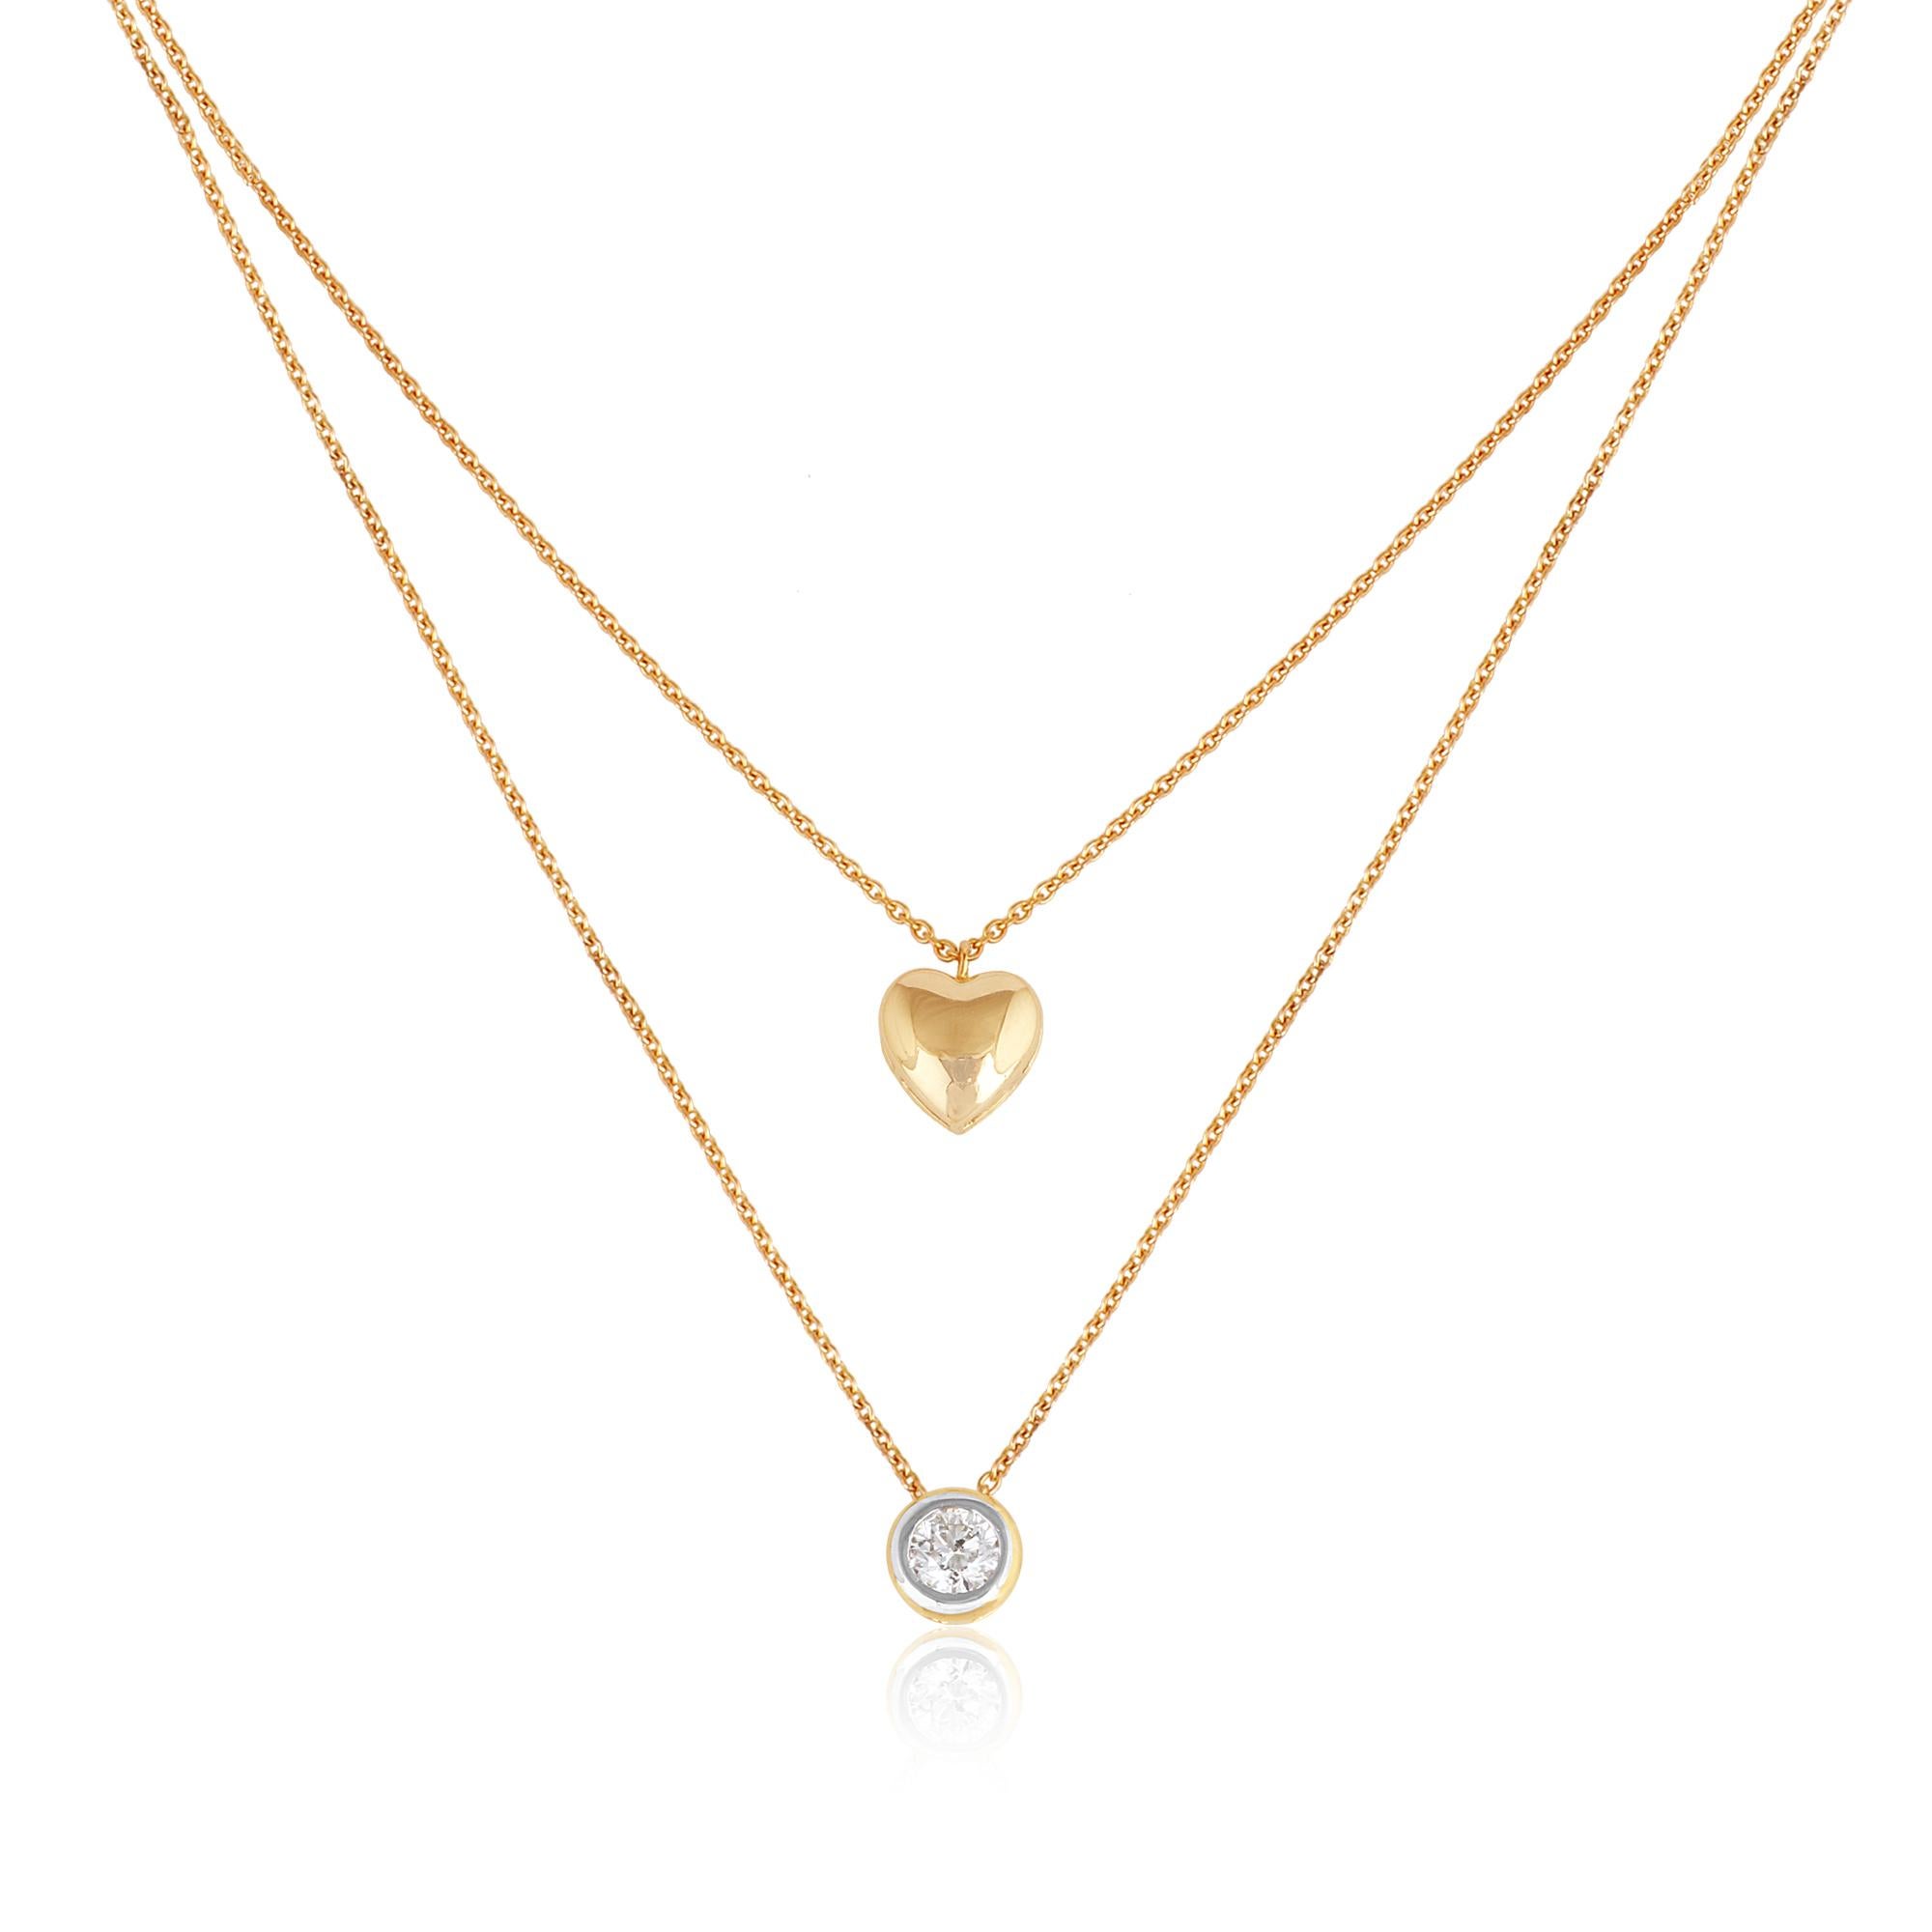 Presenting a stunning piece of fine jewelry, the Natural Bezel Set Diamond Heart Charm Necklace in 18 Karat Yellow Gold is a true embodiment of elegance and romance.
Item Code :- CN-26065
Gross Wt. :- 6.98 gm
18k Yellow Gold Wt. :- 6.88 gm
Natural